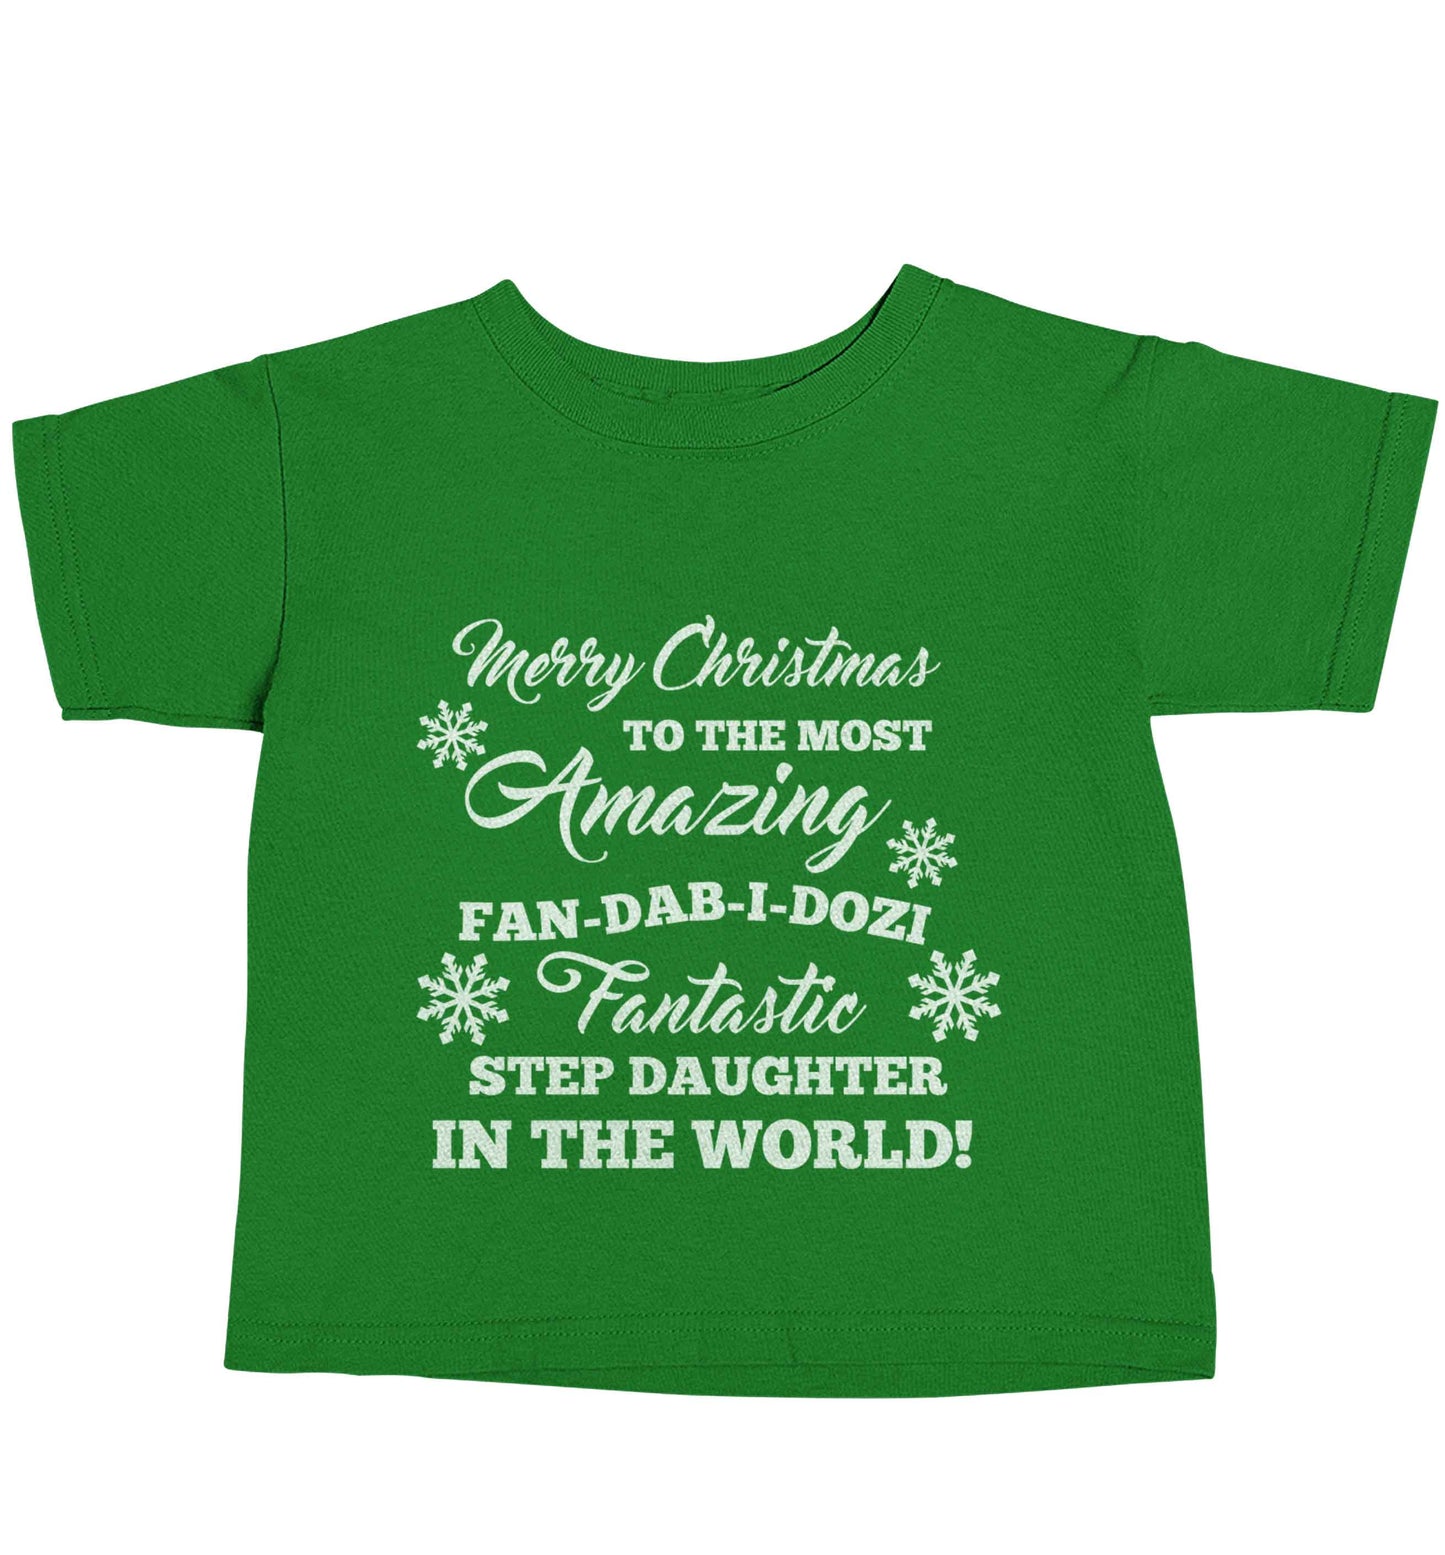 Merry Christmas to the most amazing fan-dab-i-dozi fantasic Step Daughter in the world green baby toddler Tshirt 2 Years